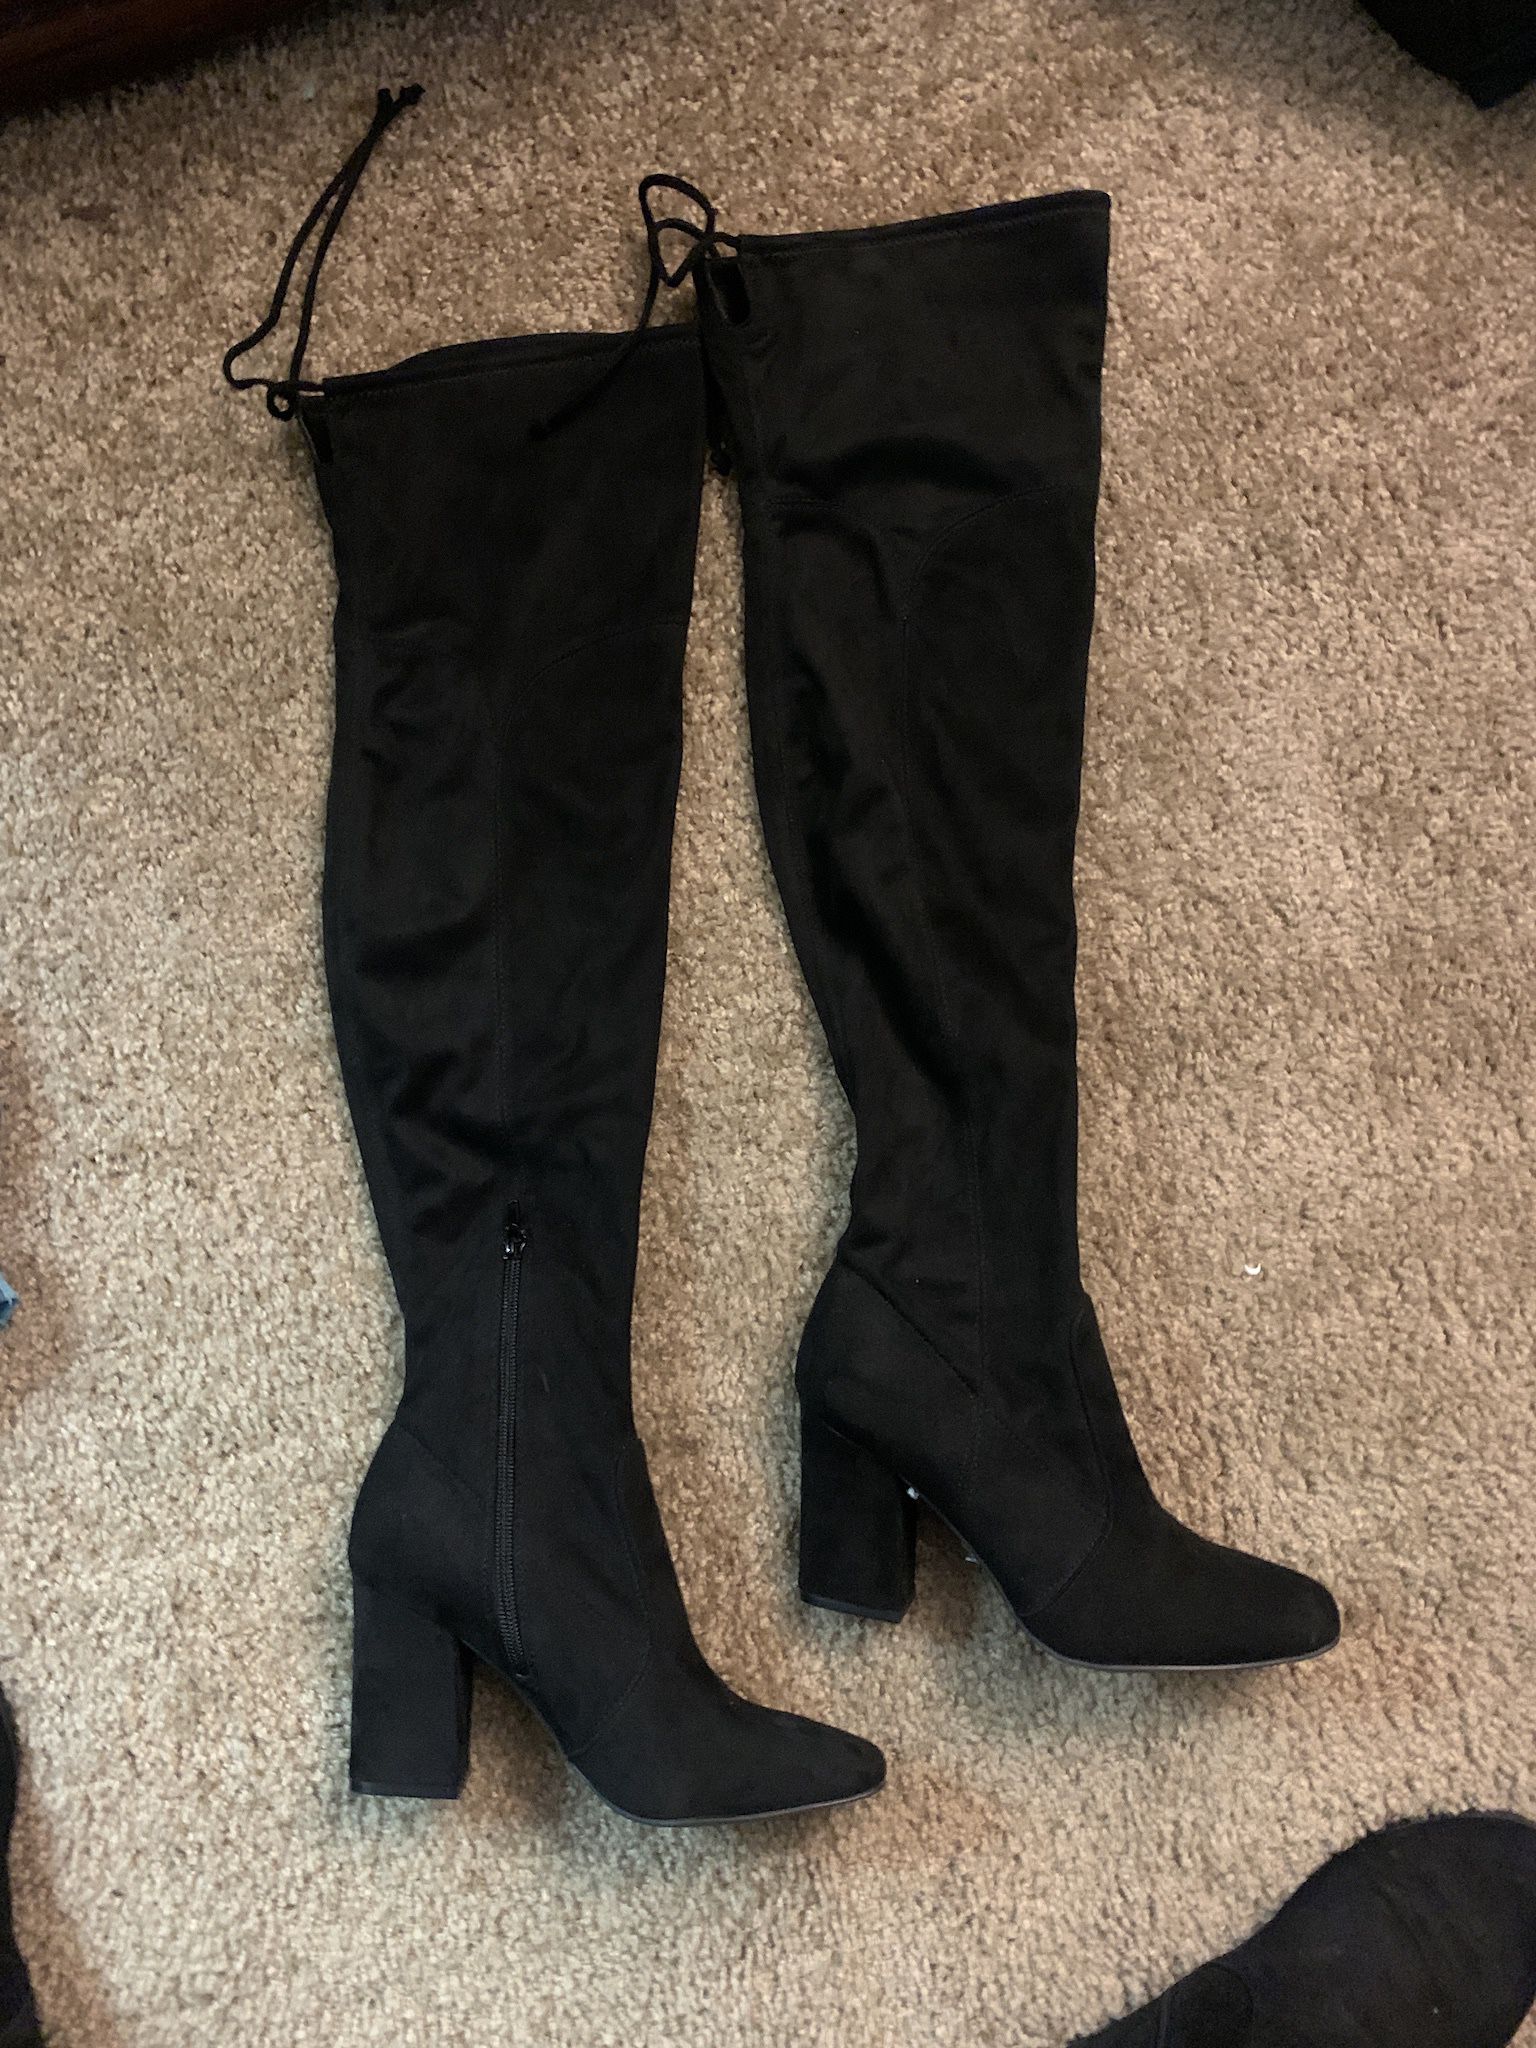 Brand New Size 7 Suede Ladies Thigh High Boots 